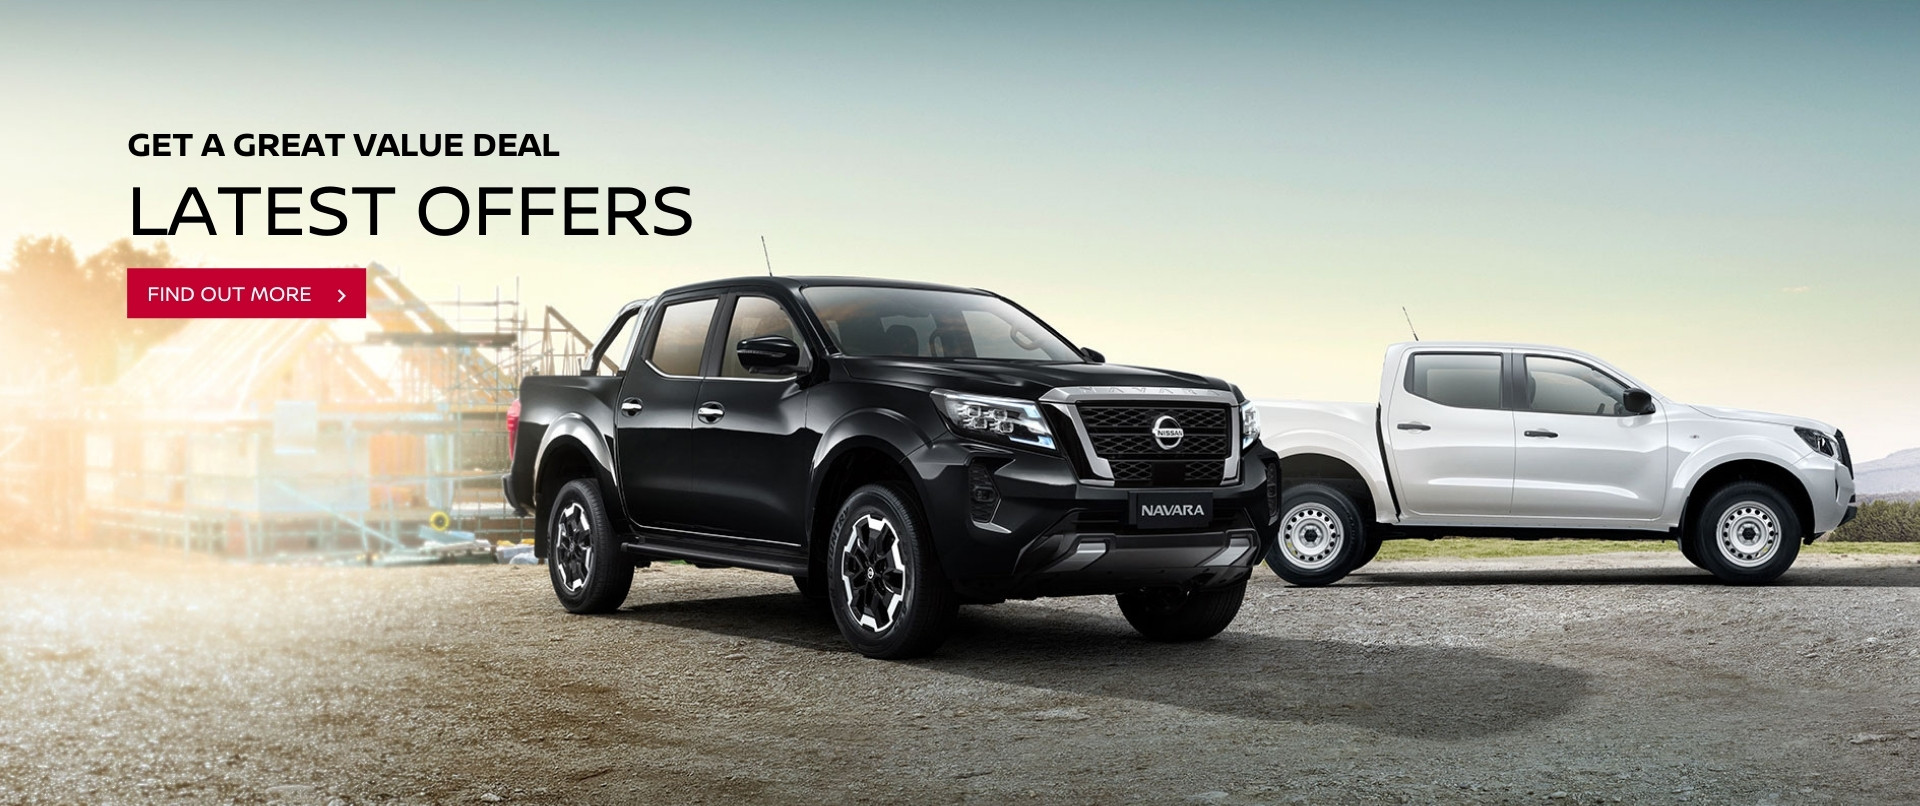 See Our Latest Nissan Offers